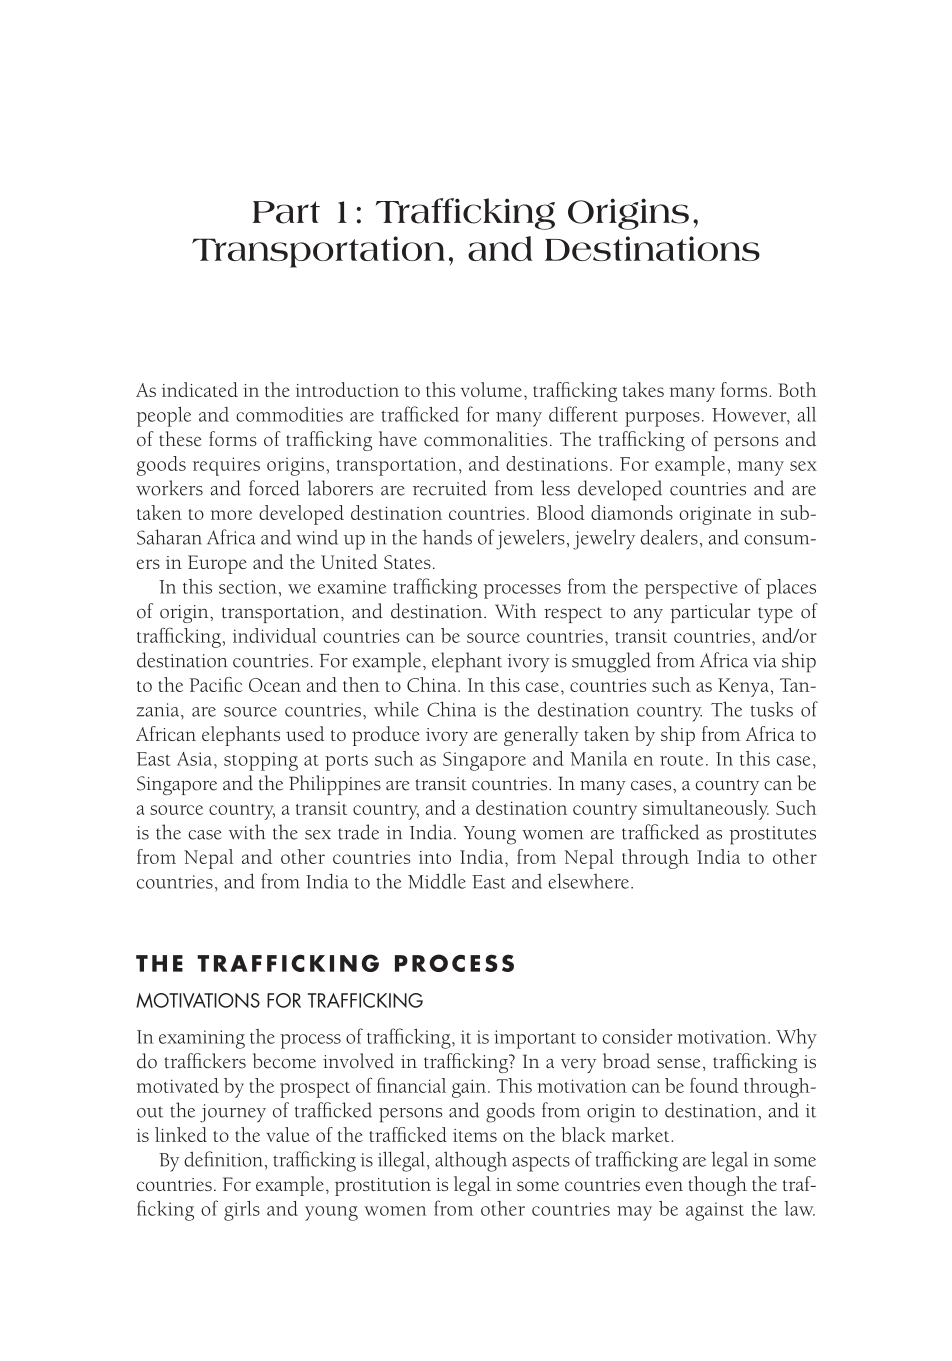 Geography of Trafficking: From Drug Smuggling to Modern-Day Slavery page 1